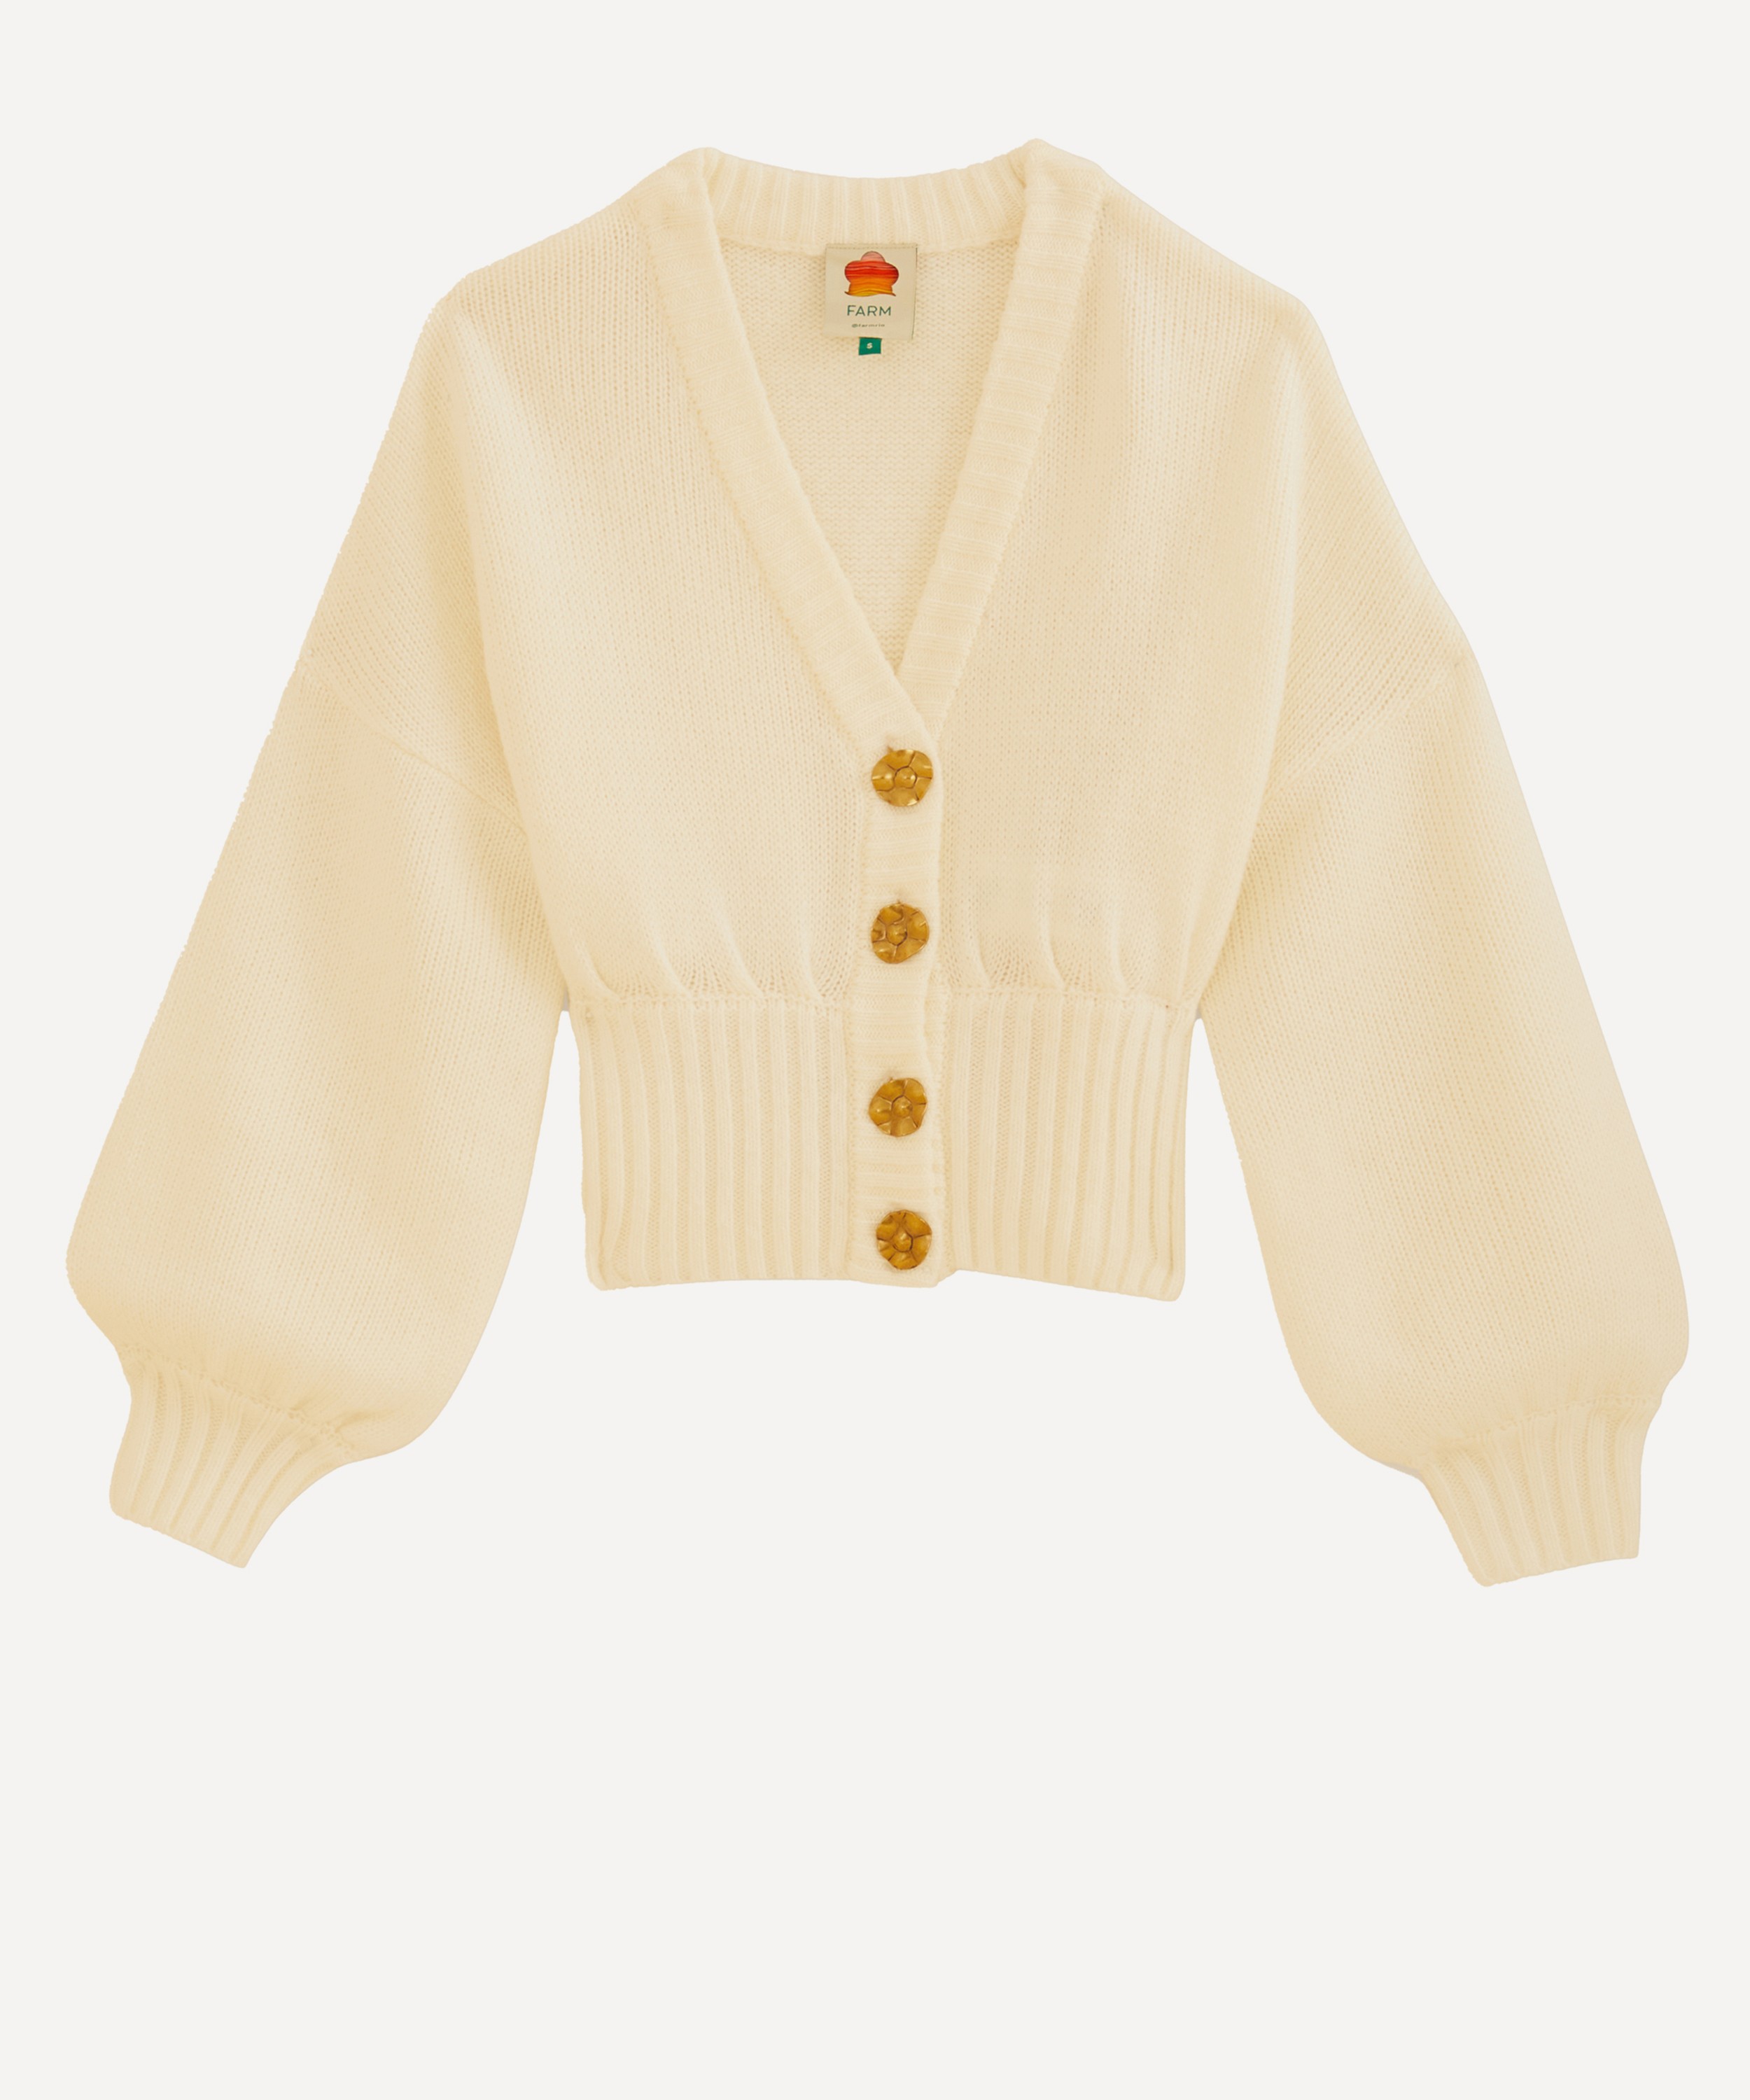 FARM Rio - Off-White Bubble Knit Cardigan image number 0